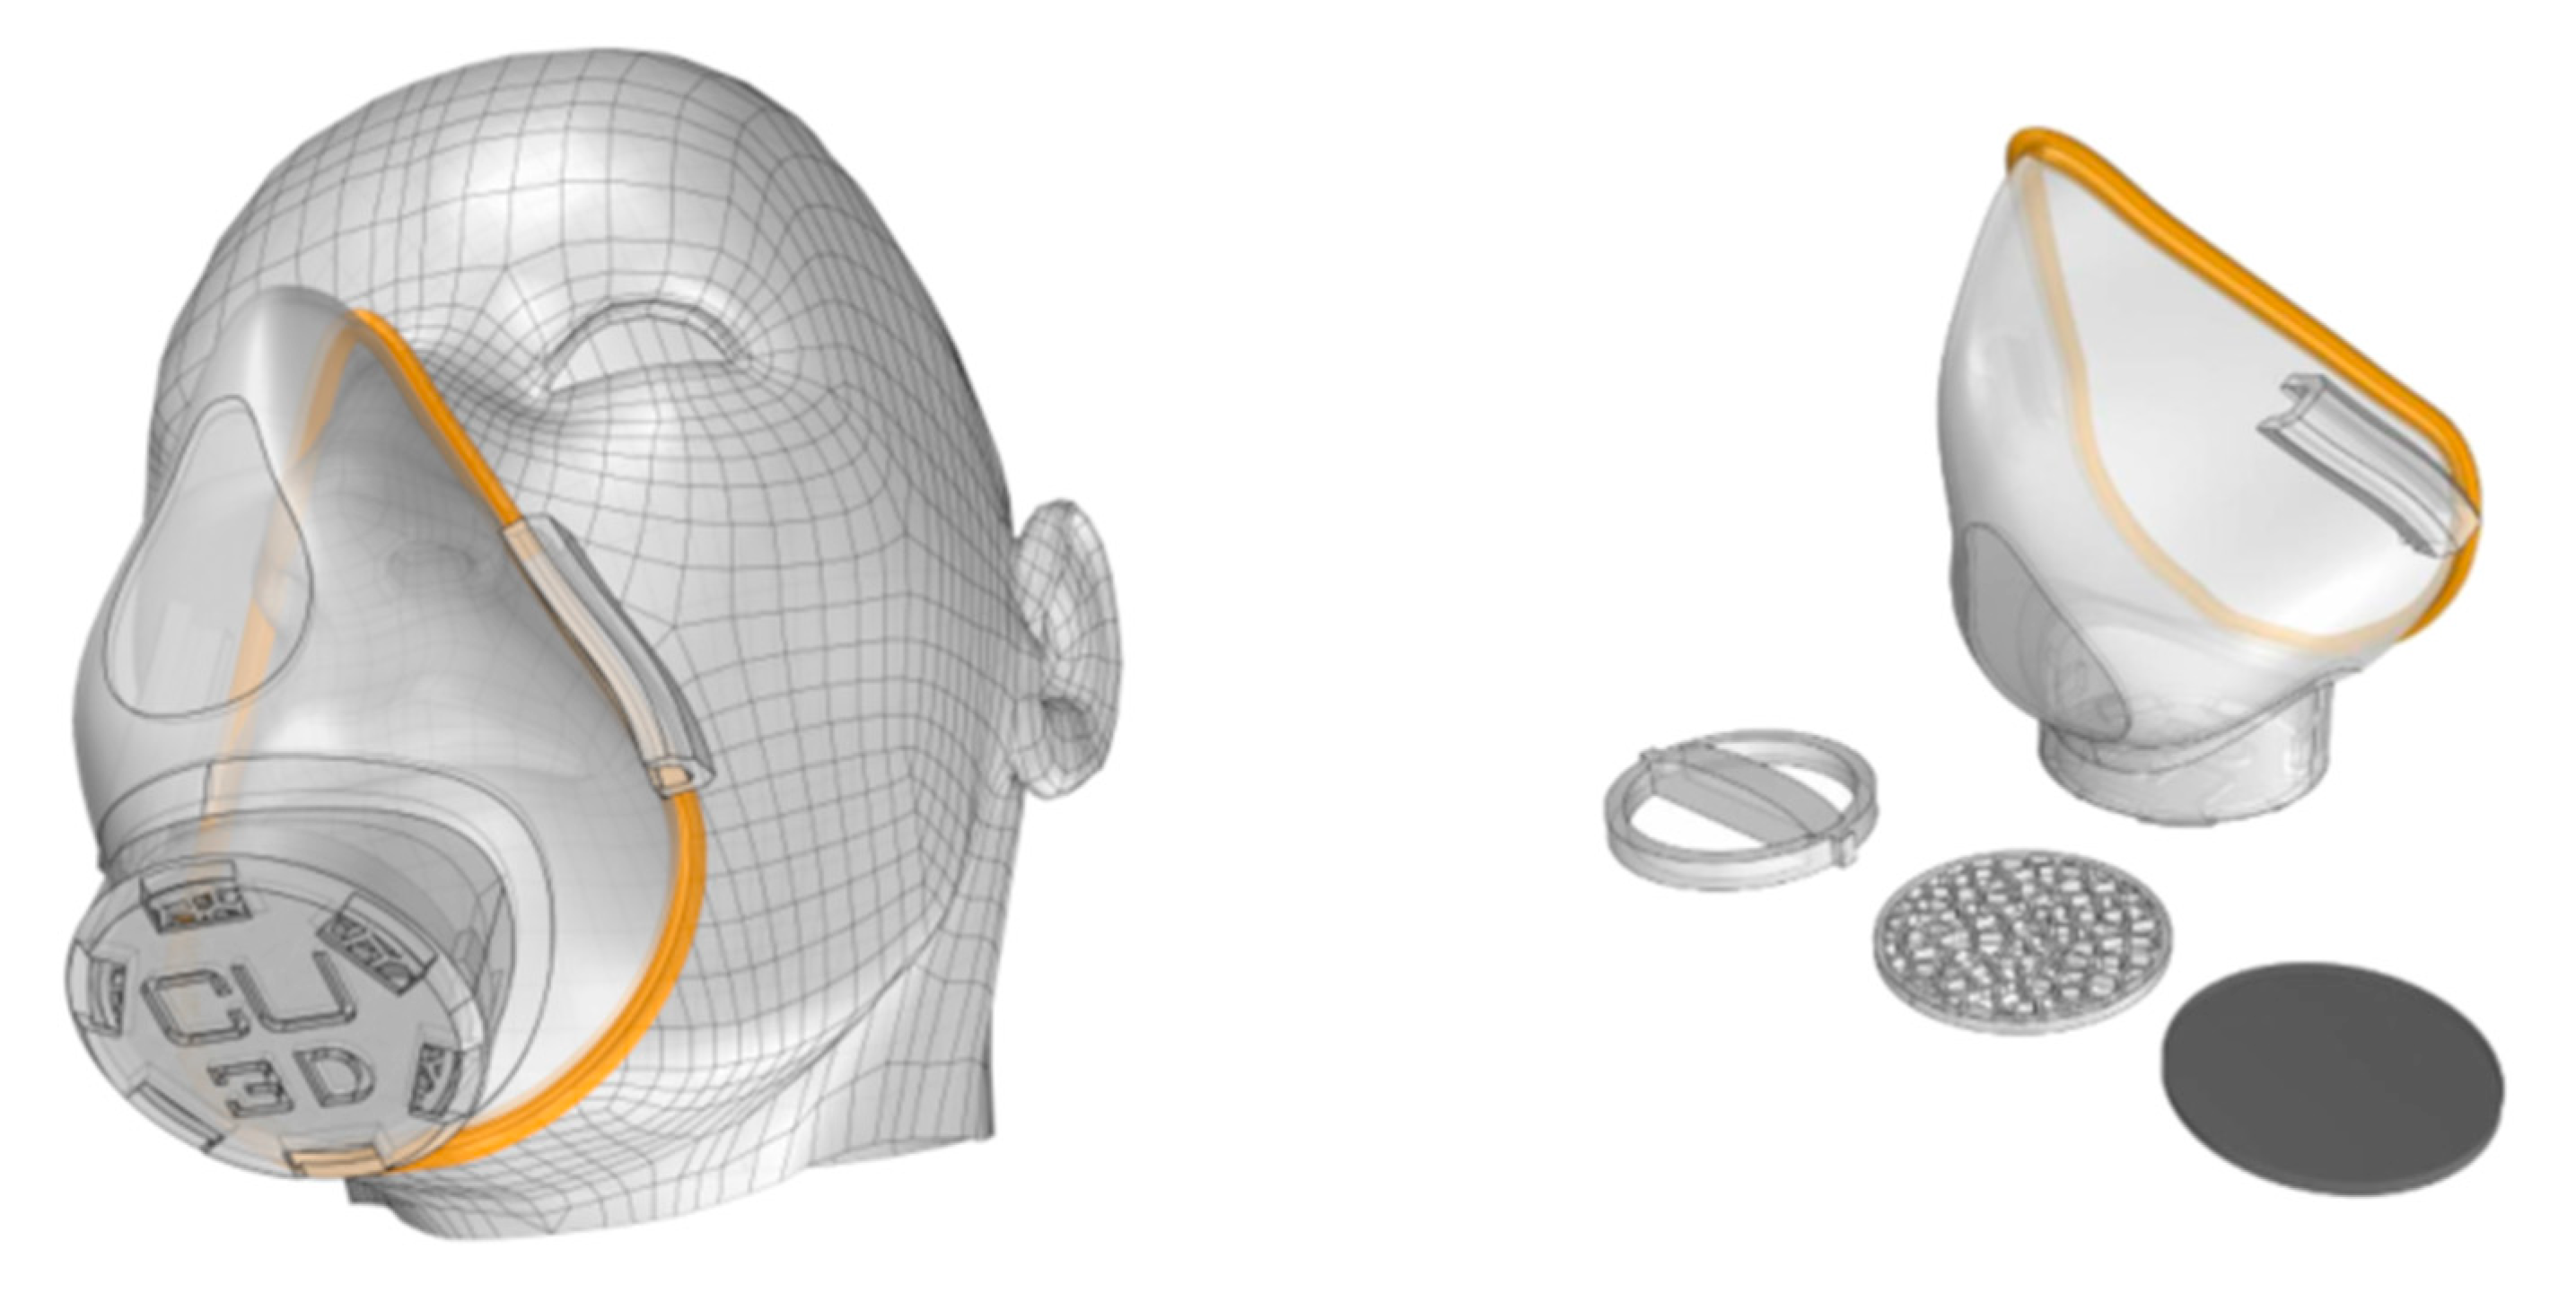 NanoHack, an open-source 3D printed mask against COVID-19 - 3Dnatives